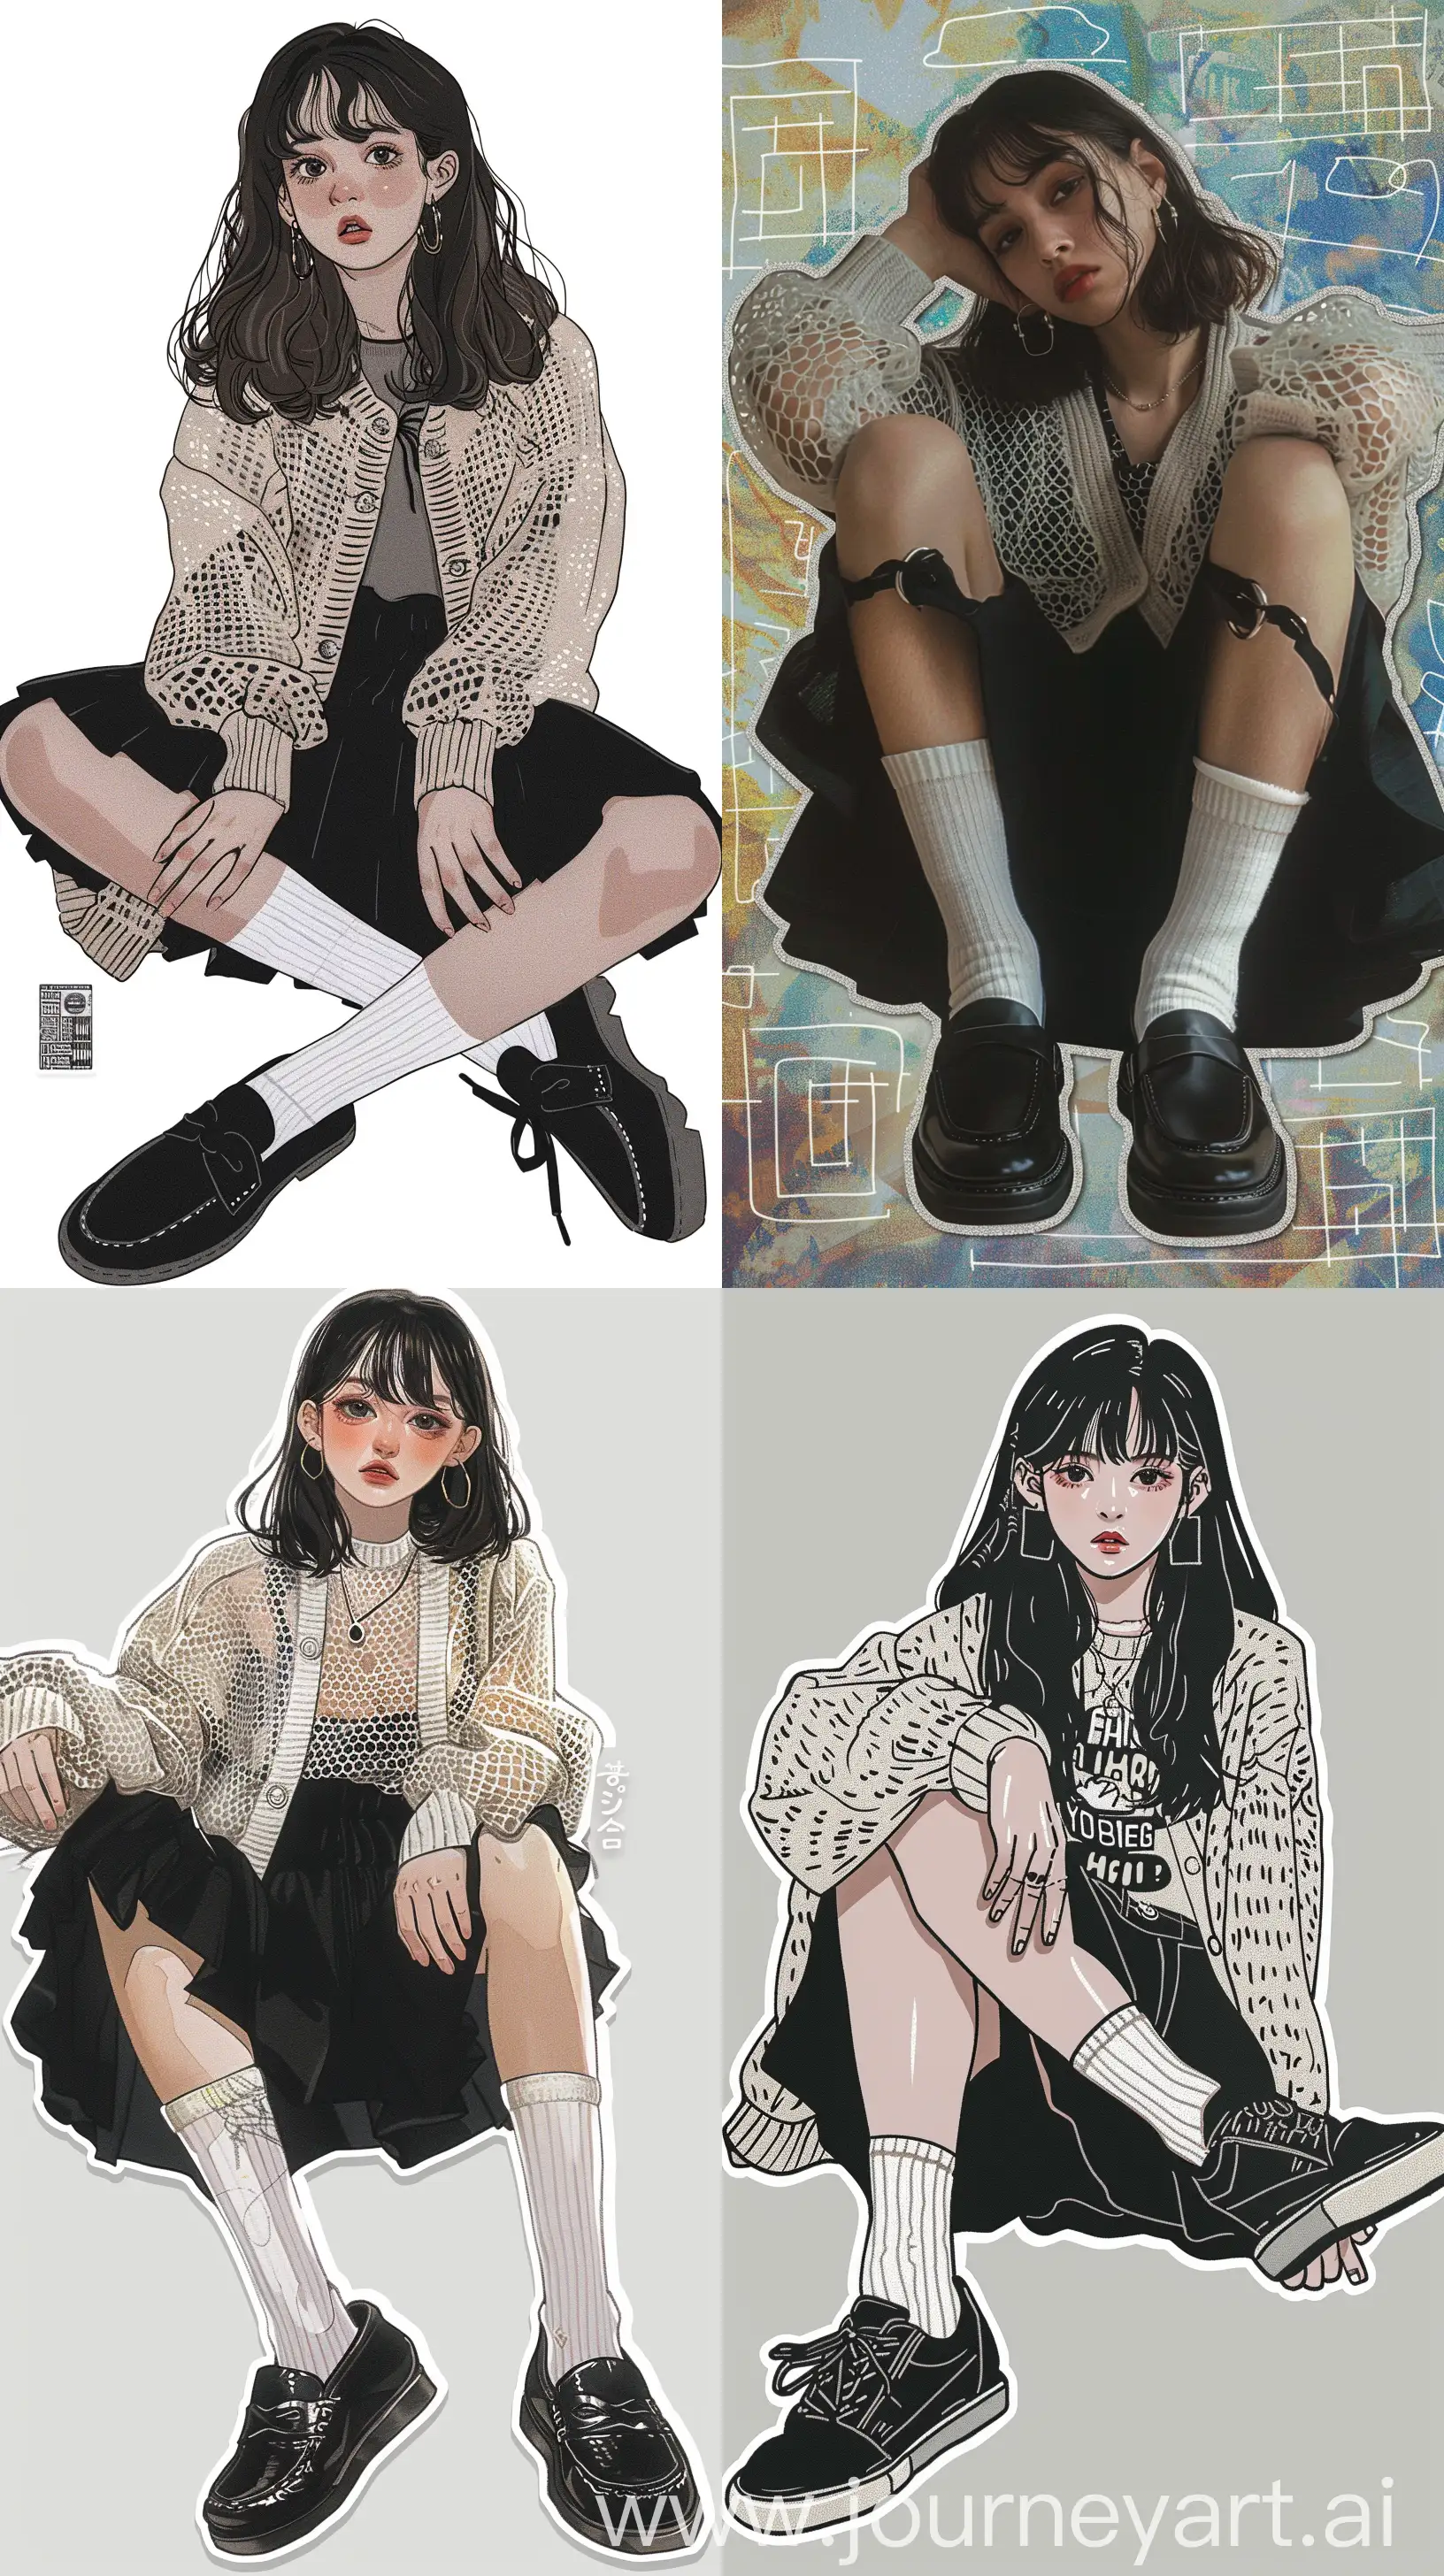 Y2K-Anime-Aesthetic-Girl-in-Net-Cardigan-and-Black-Skirt-Sitting-Pose-with-Sticker-Design